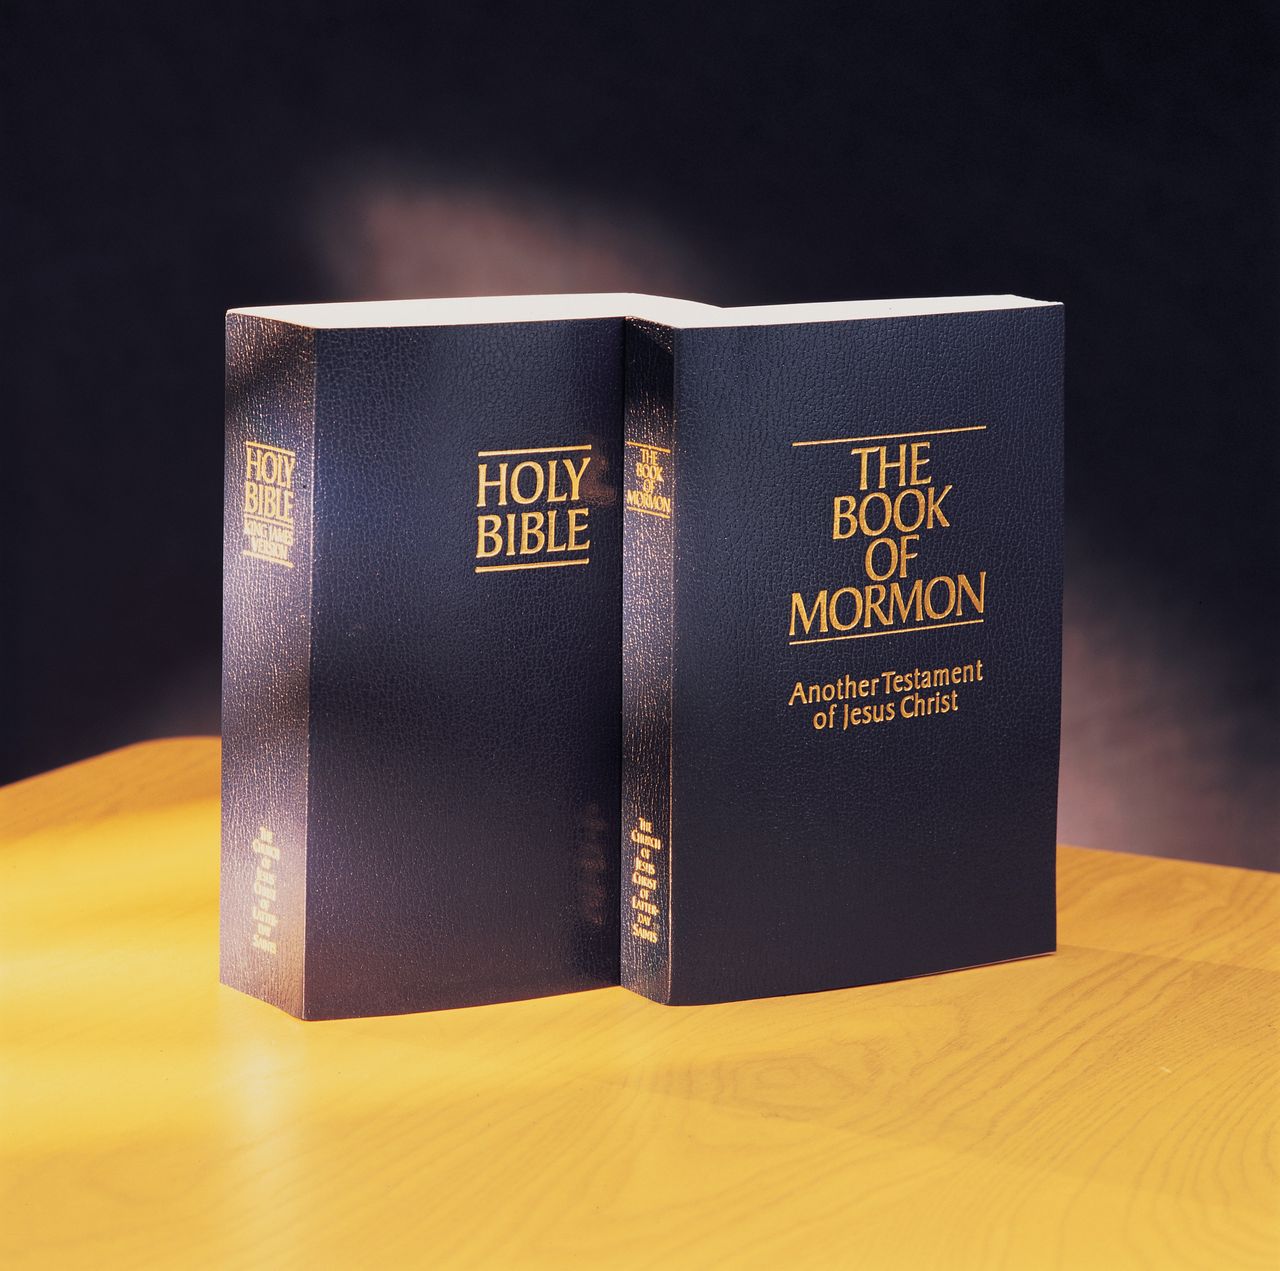 The Bible and the Book of Mormon